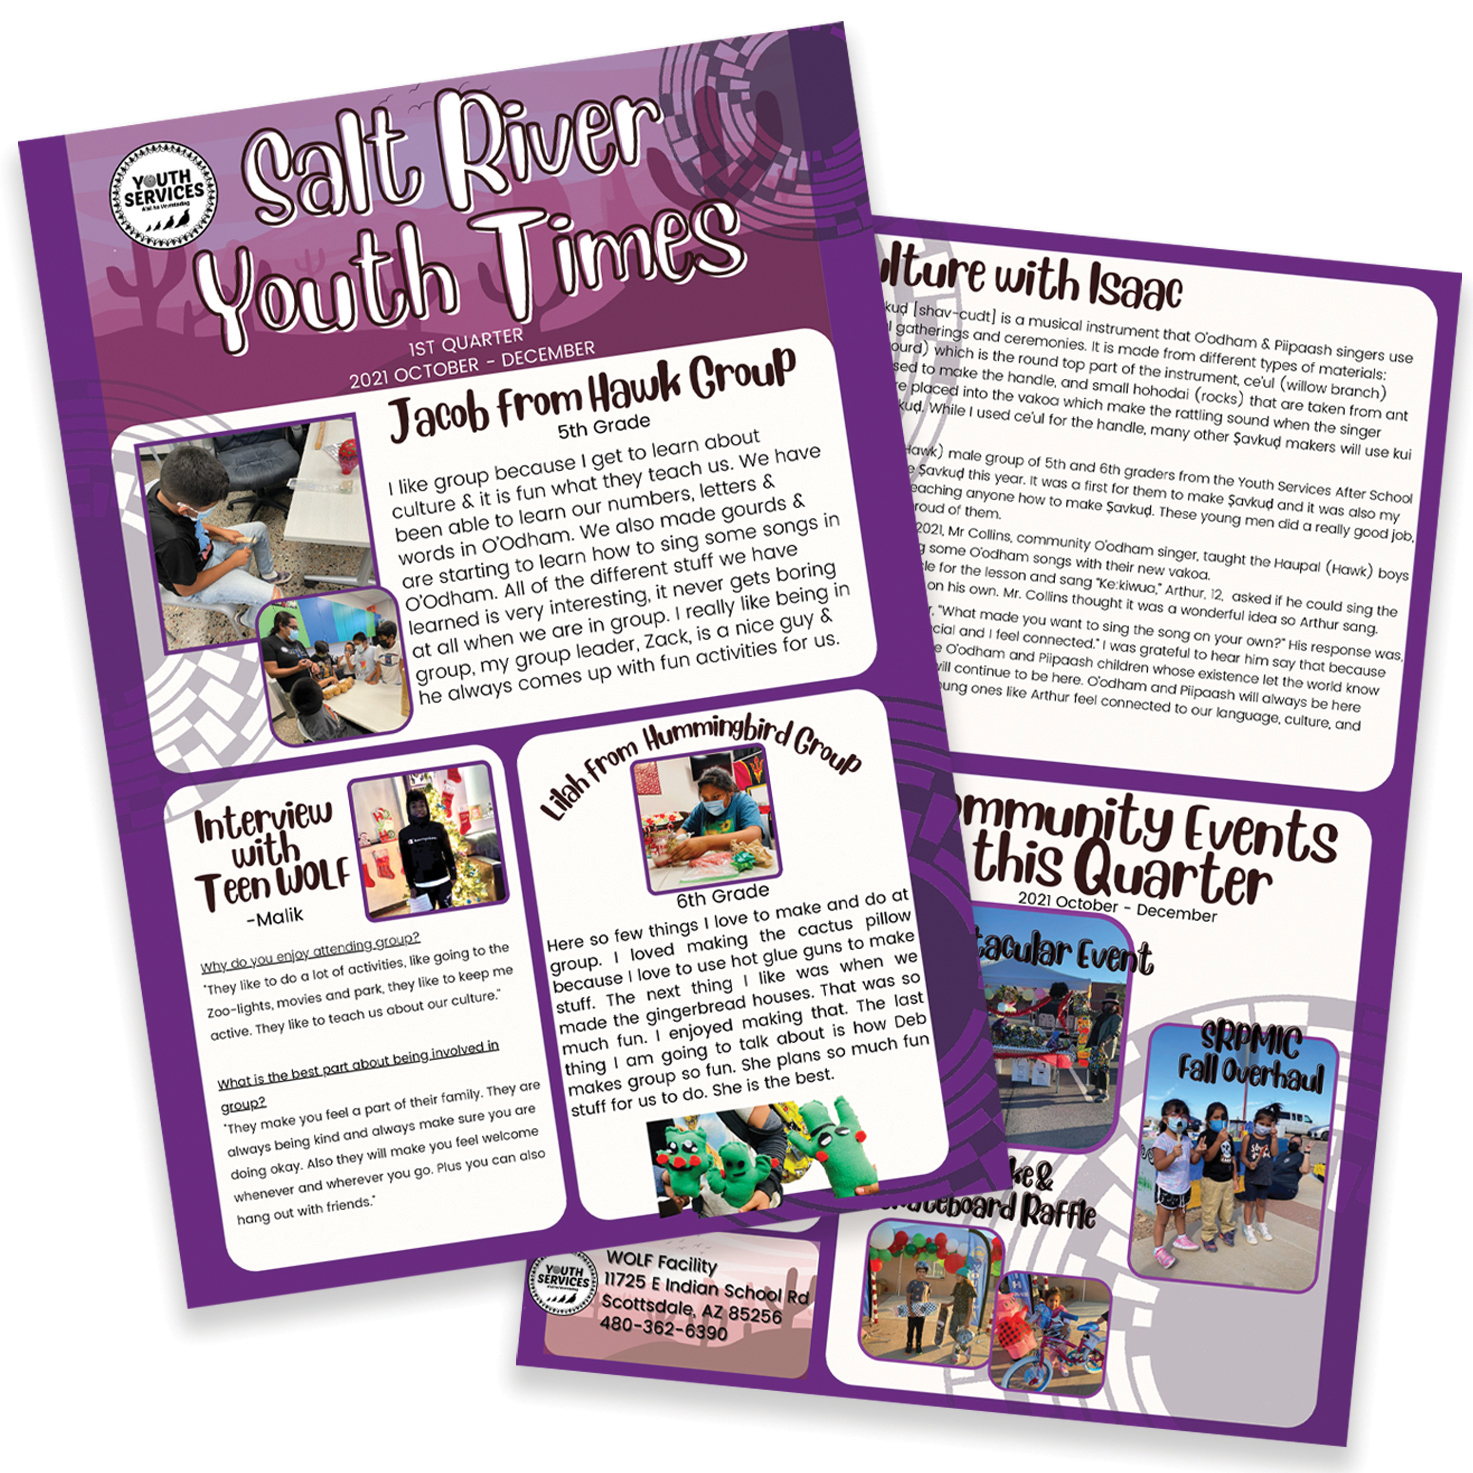 Youth Services Quarterly Newsletter Highlights the Department and Programs